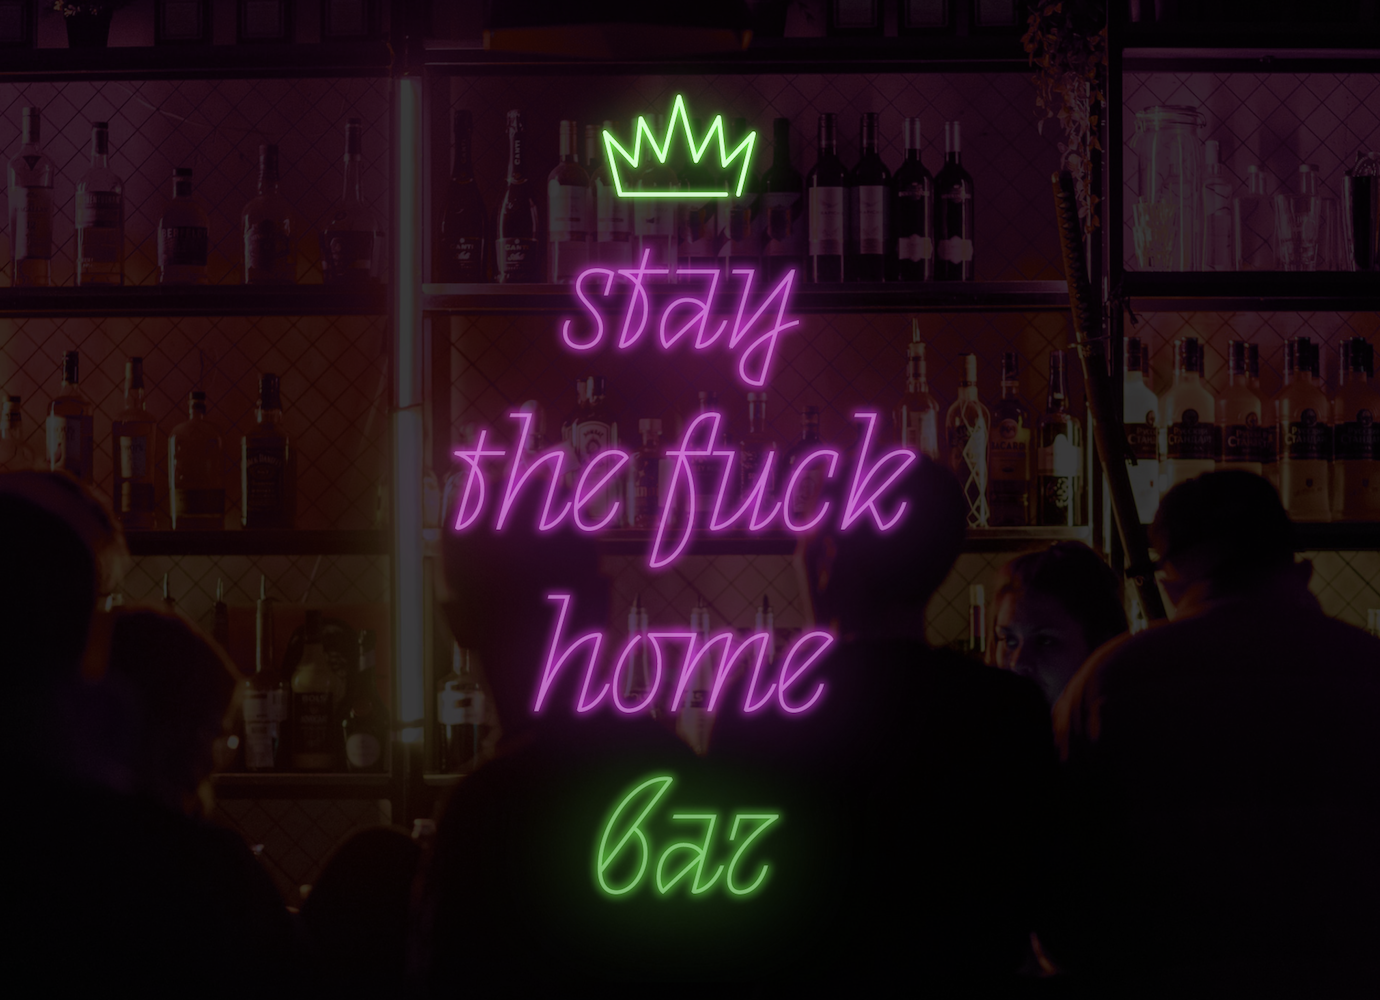 #Staythefuckhome: visit the online bar that just opened in St Petersburg